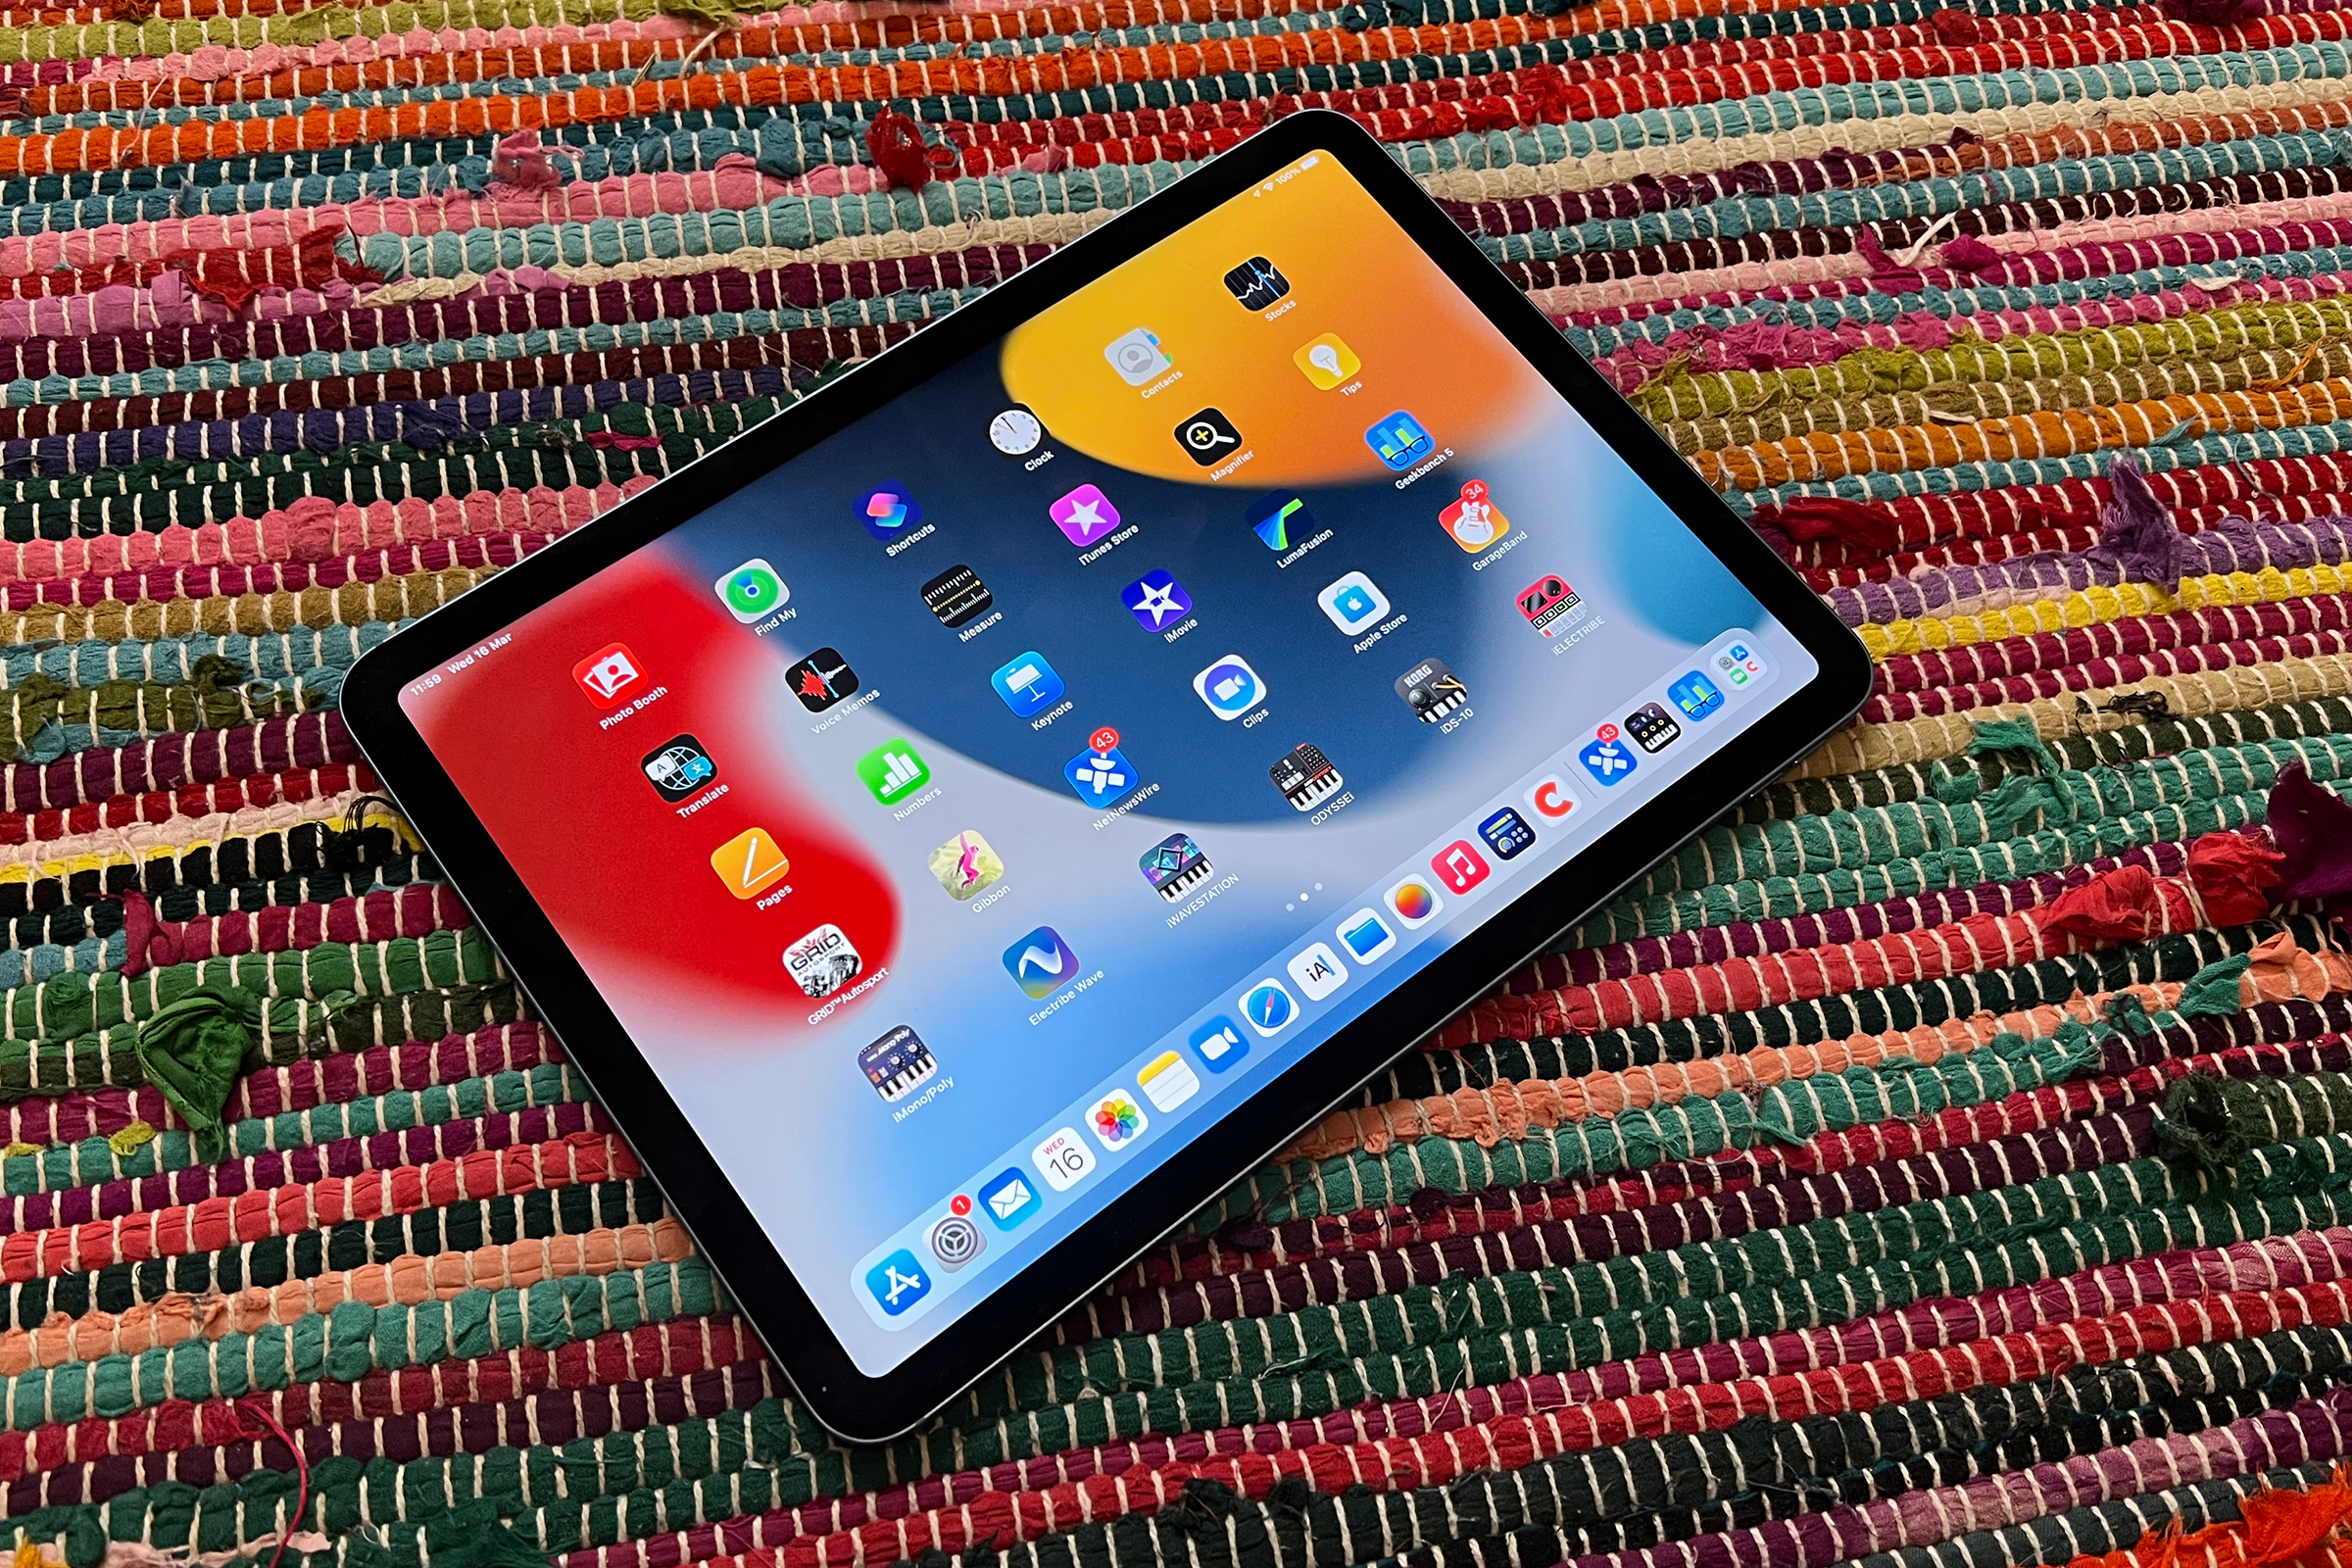 Apple iPad Air (5th Gen) review: the best iPad for most people